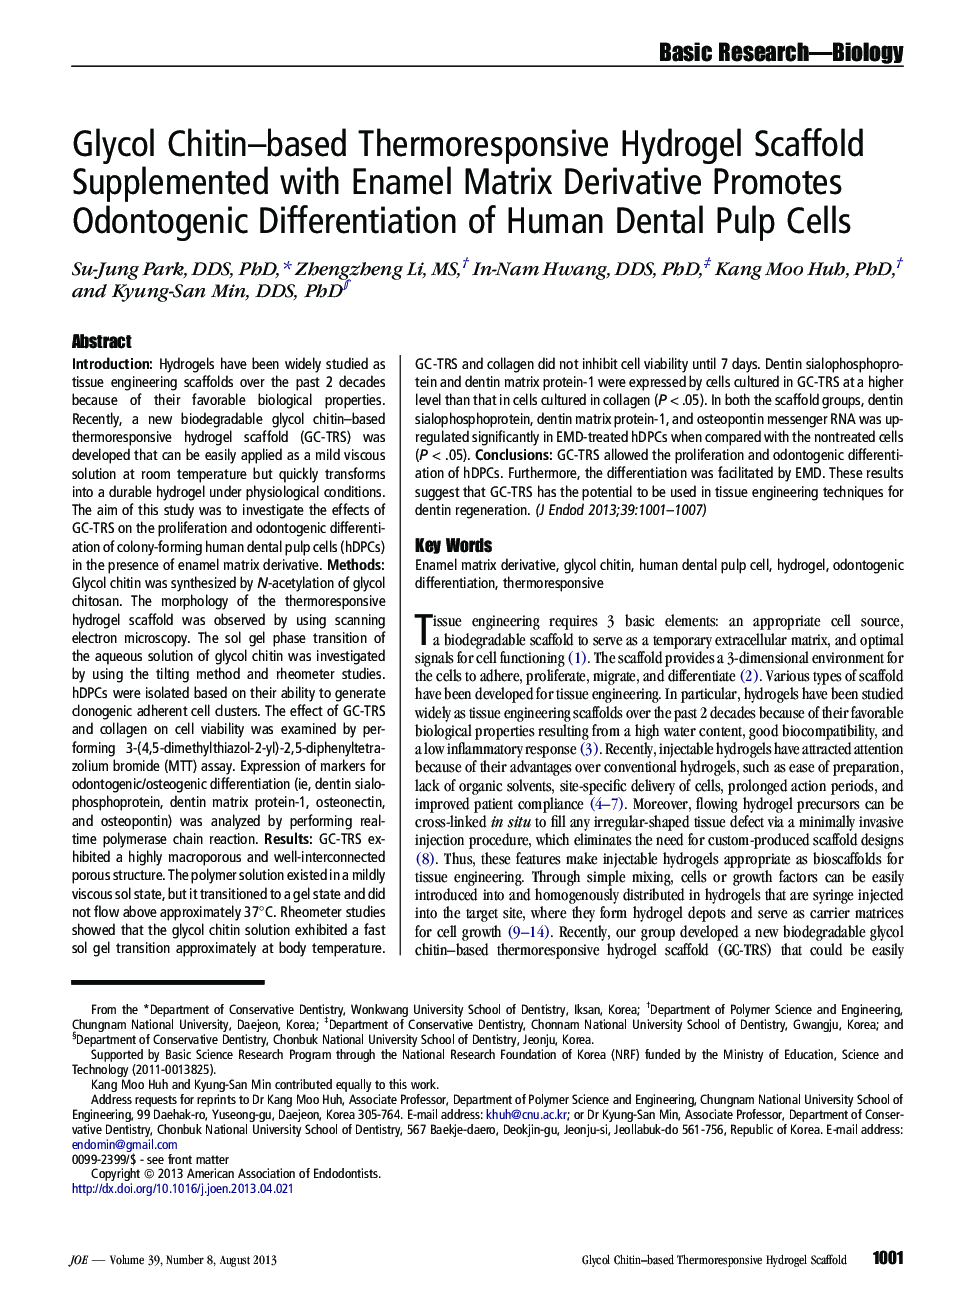 Glycol Chitin–based Thermoresponsive Hydrogel Scaffold Supplemented with Enamel Matrix Derivative Promotes Odontogenic Differentiation of Human Dental Pulp Cells 